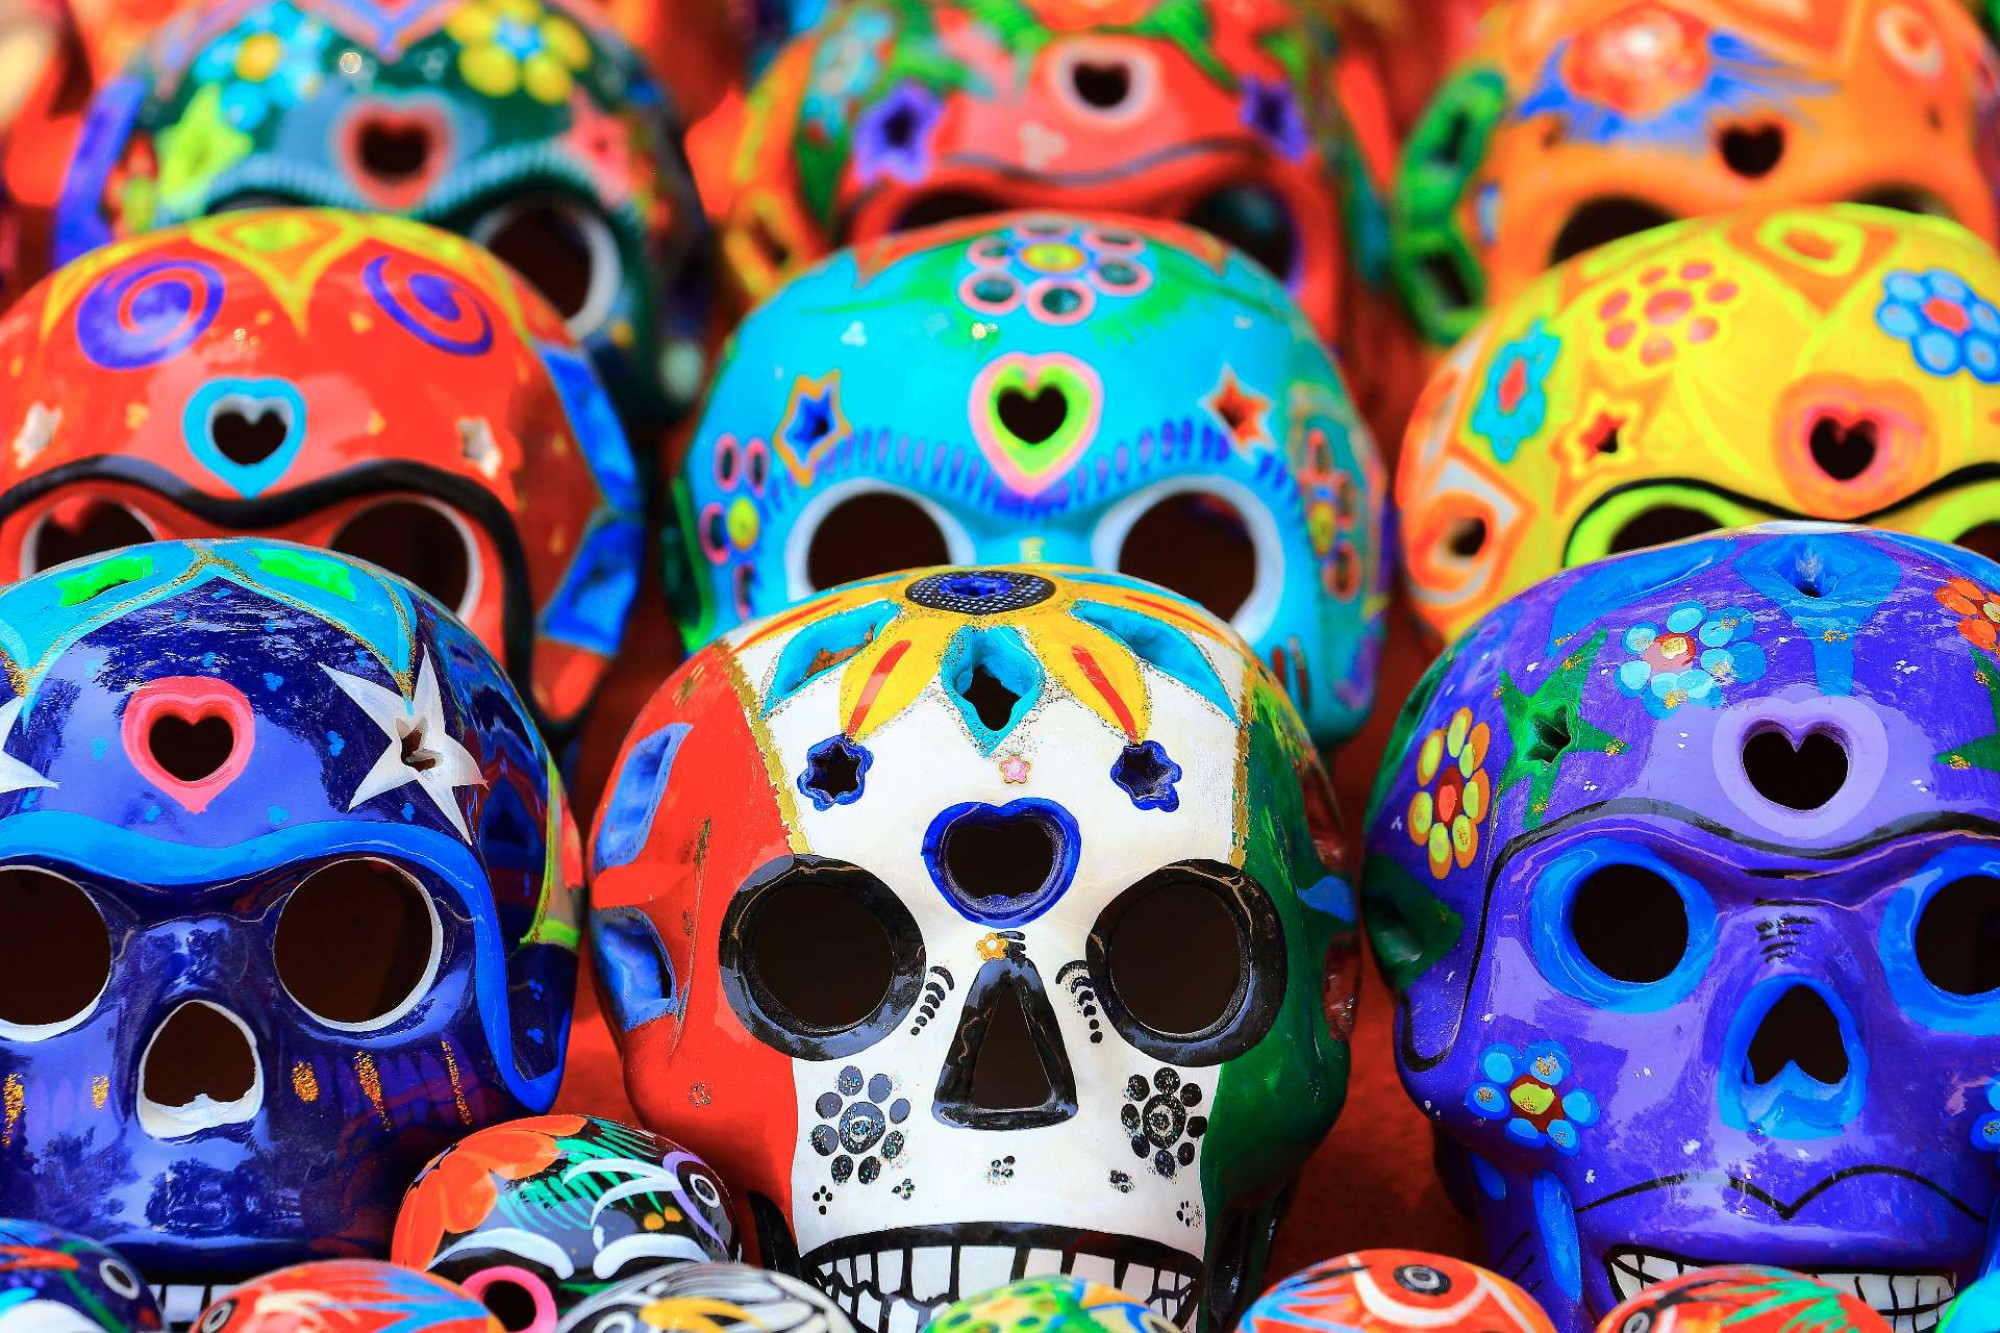 Colourful painted skulls produced for the Day of the Dead on display in Mexico City